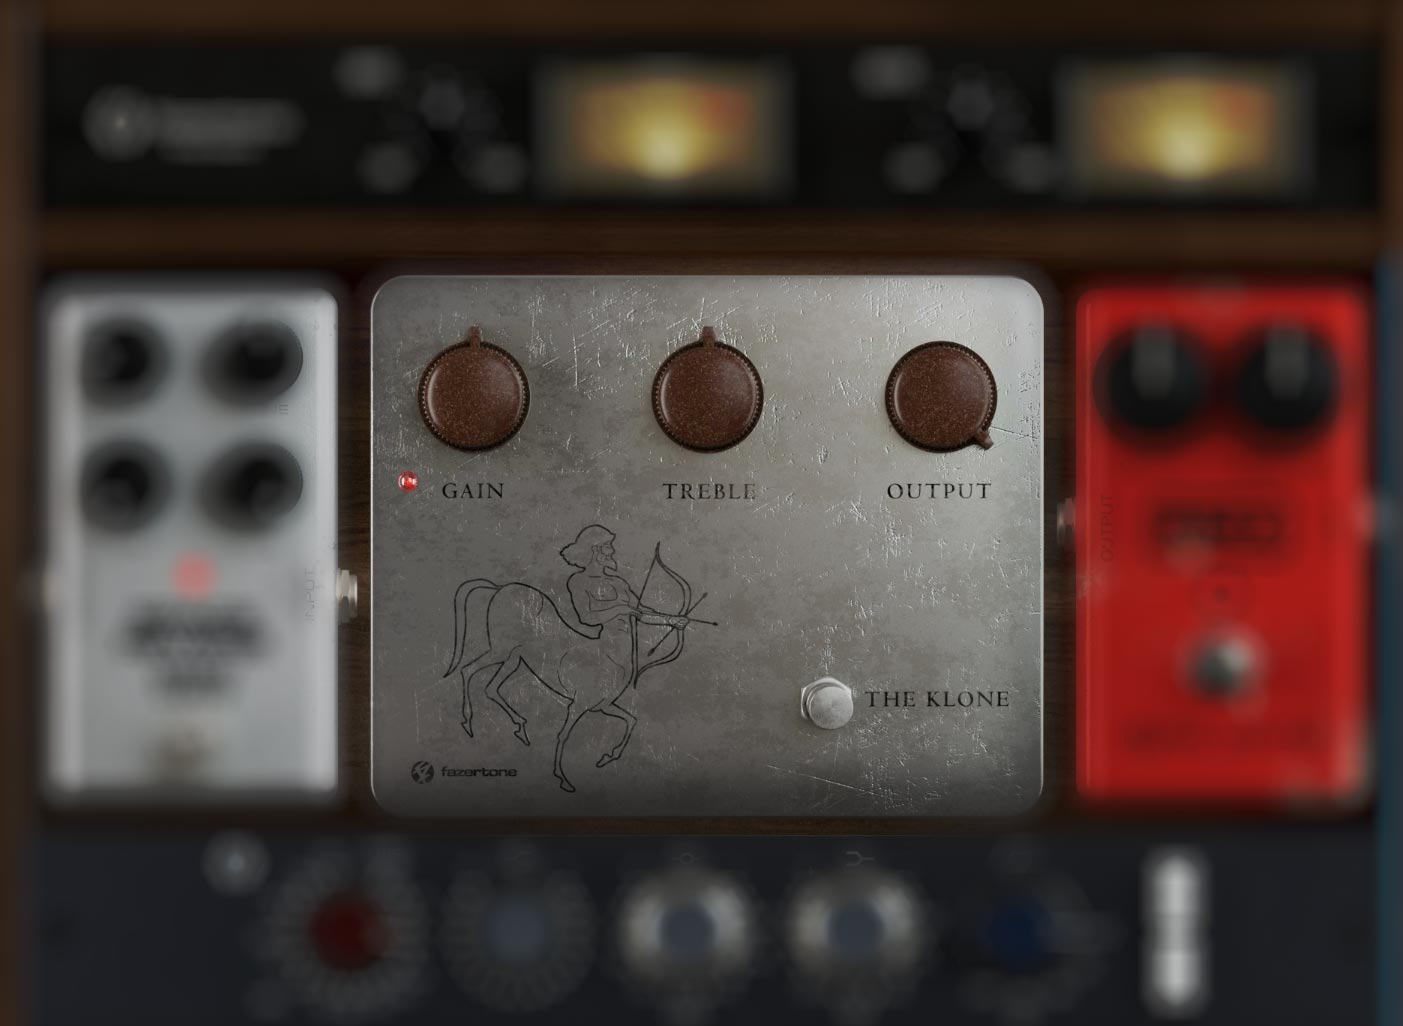 Based on the Klon Centaur, The Klone is a free overdrive pedal plugin that adds character to guitars, synths, drum machines and vocals